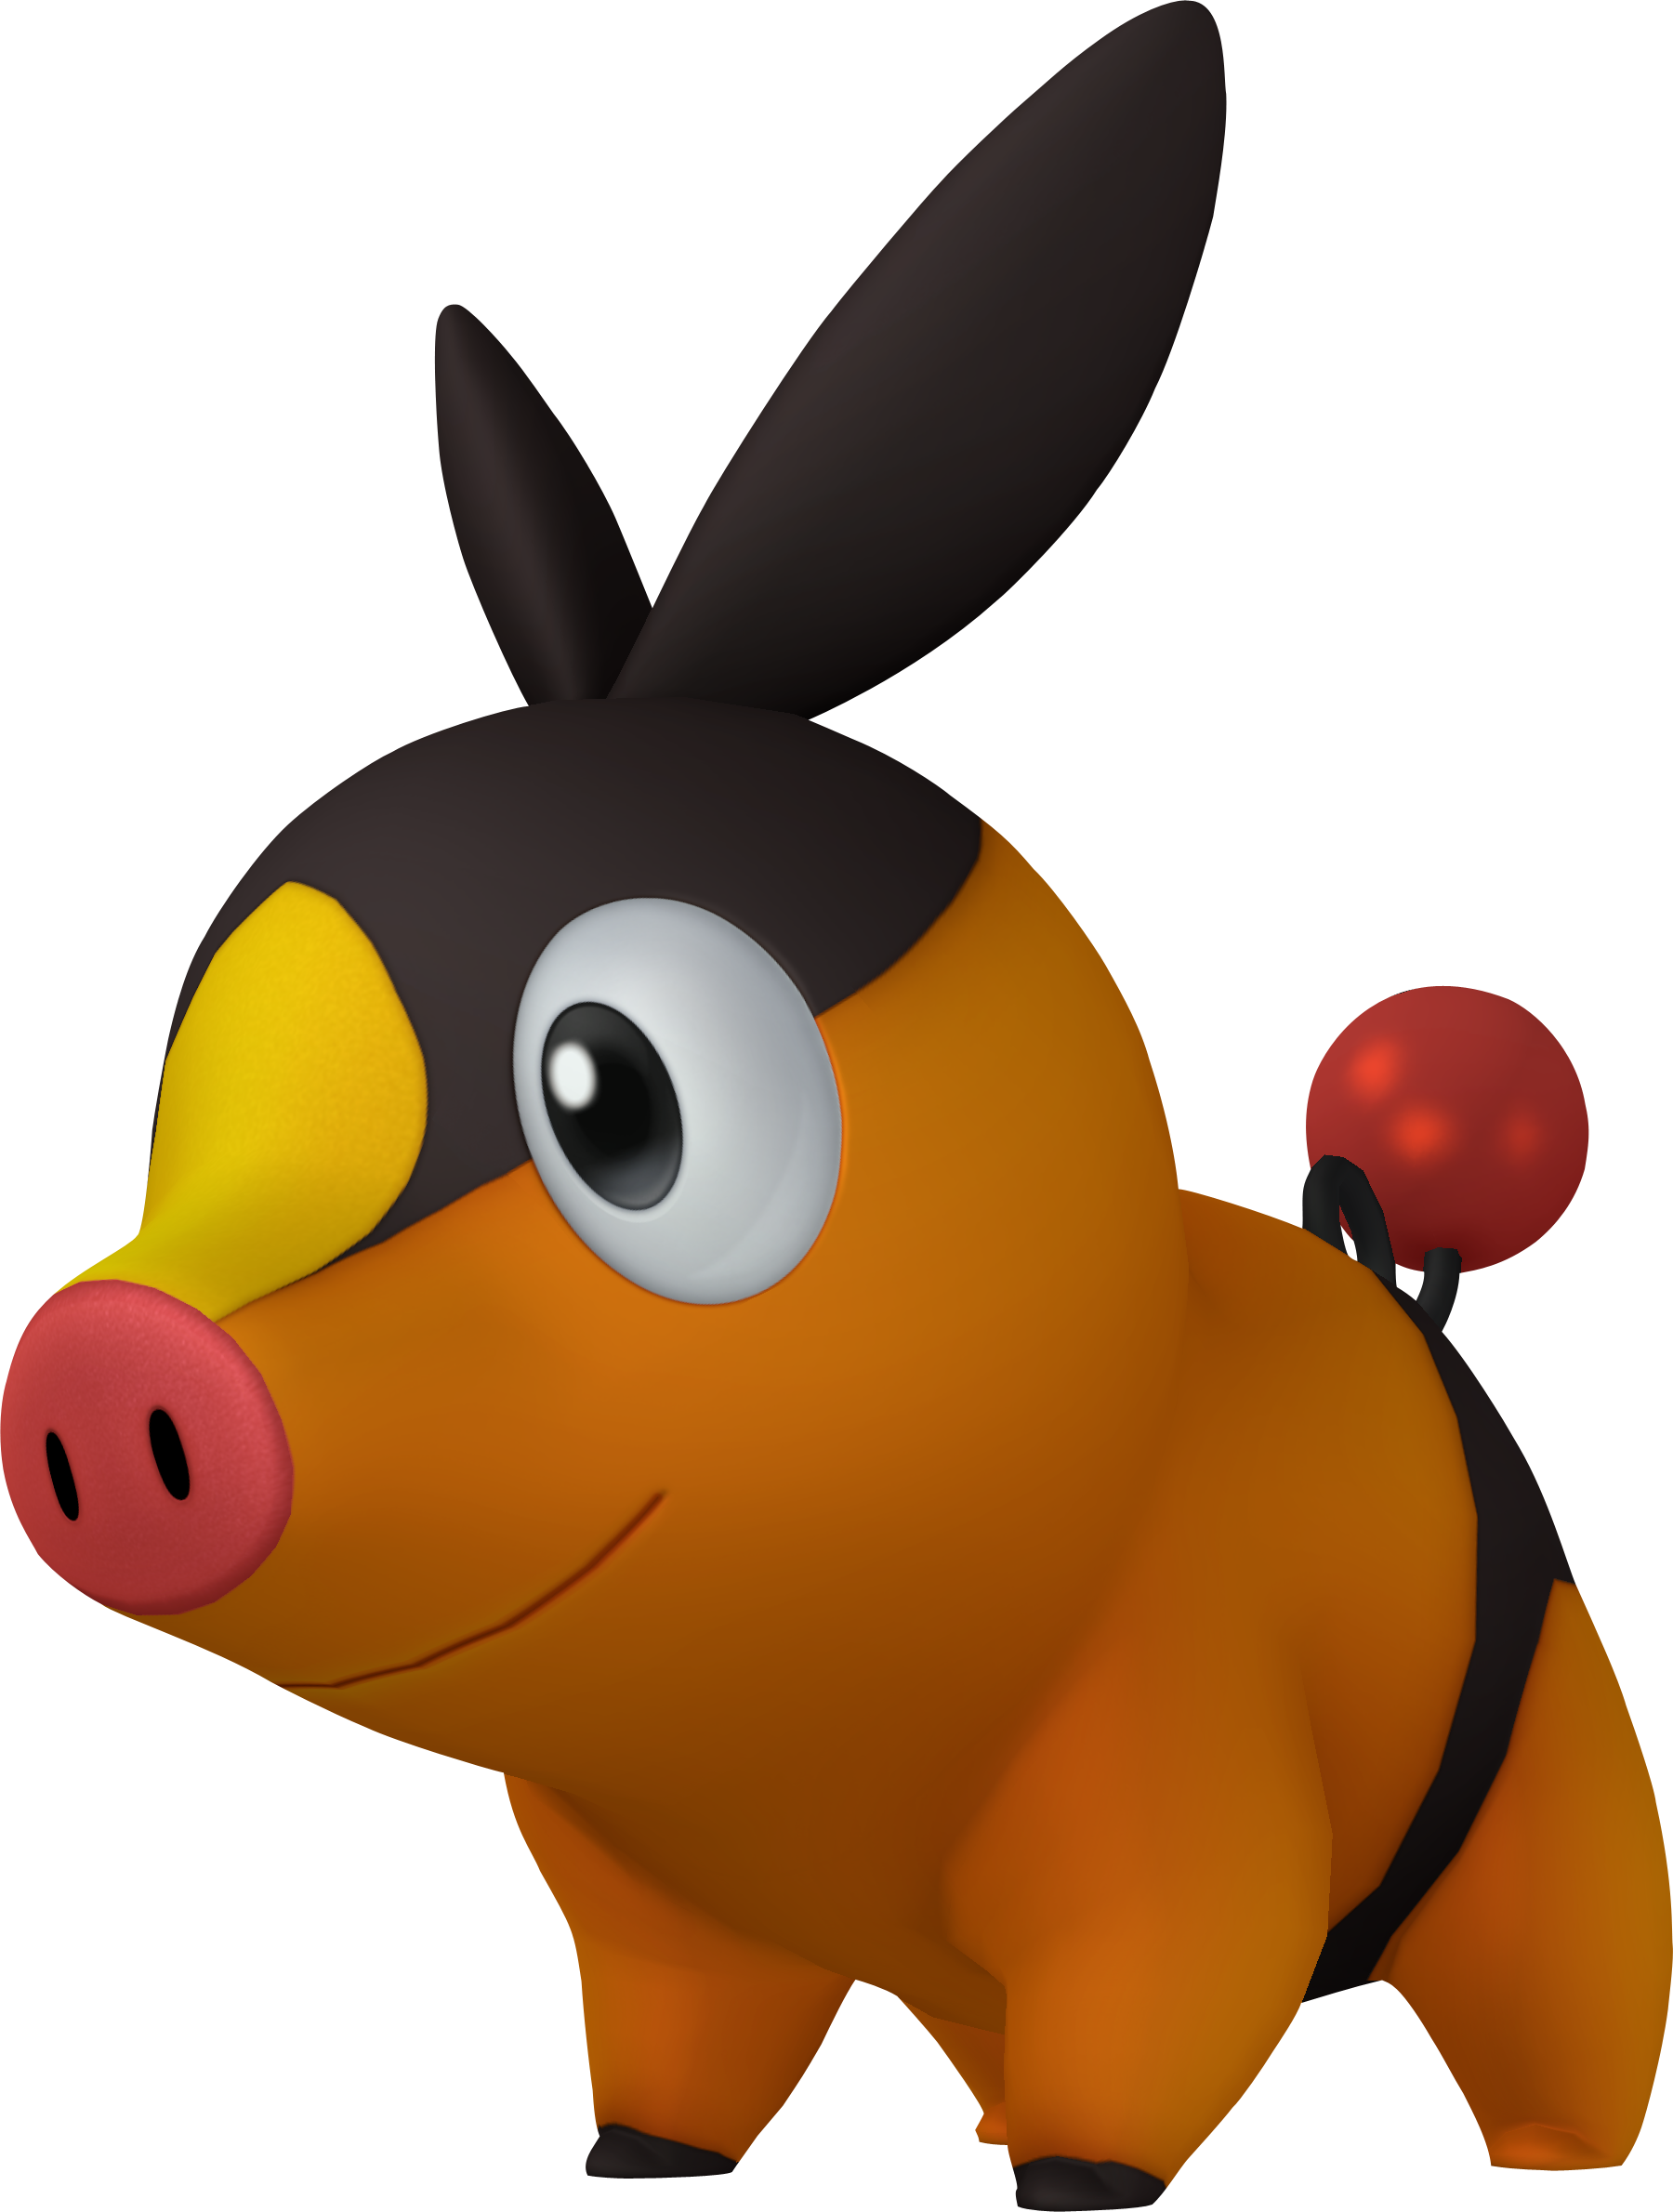 Tepig Pokemon PNG HD Images